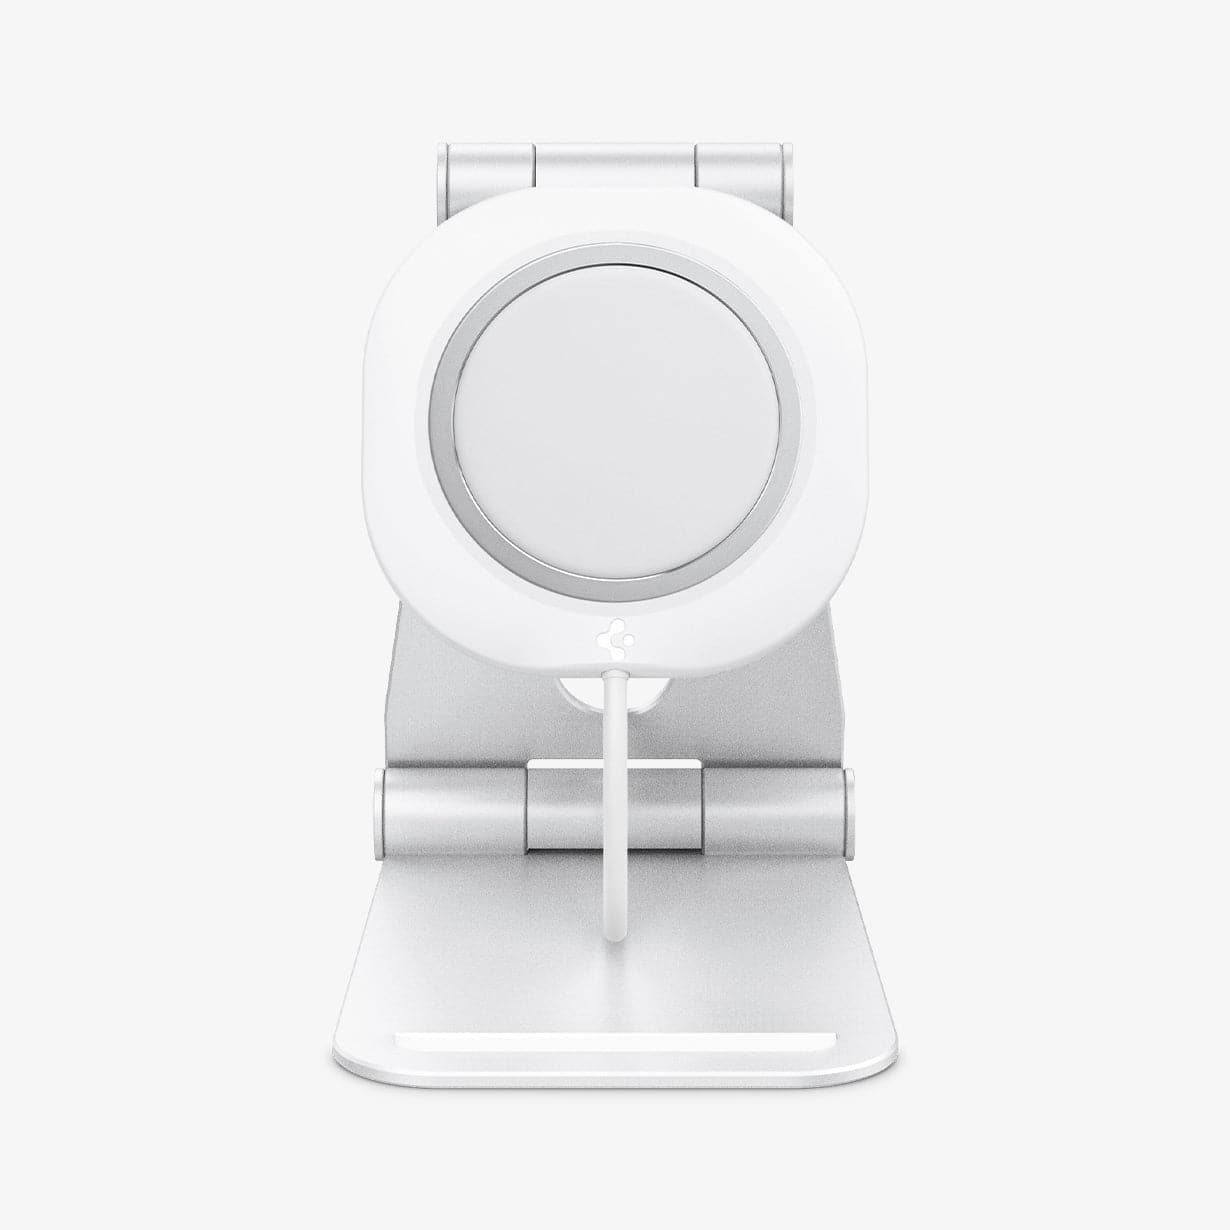 AMP02673 - MagFit Charger Stand (MagFit) in white showing the front with magsafe charger inserted